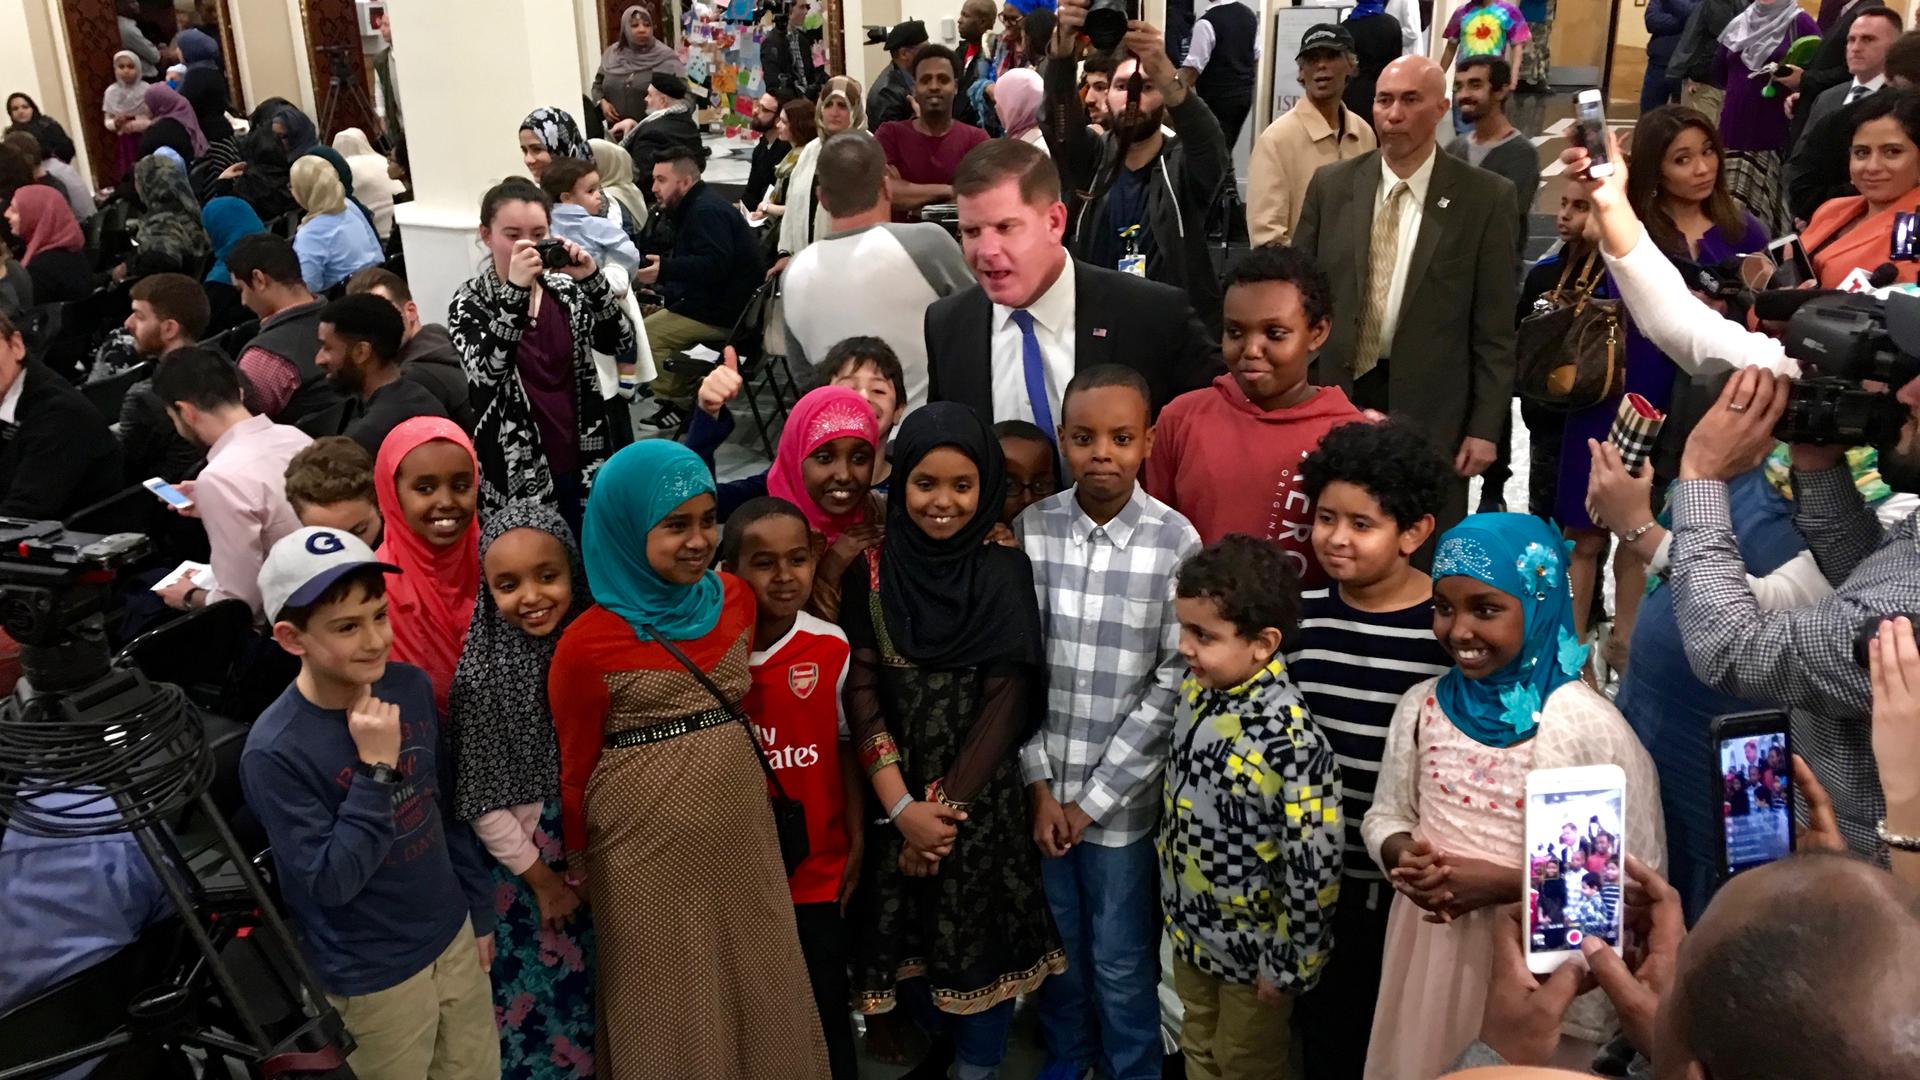 Boston Mayor Marty Walsh attended a town hall meeting at the Islamic Society of Boston Cultural Center on the evening of February 24, 2017.